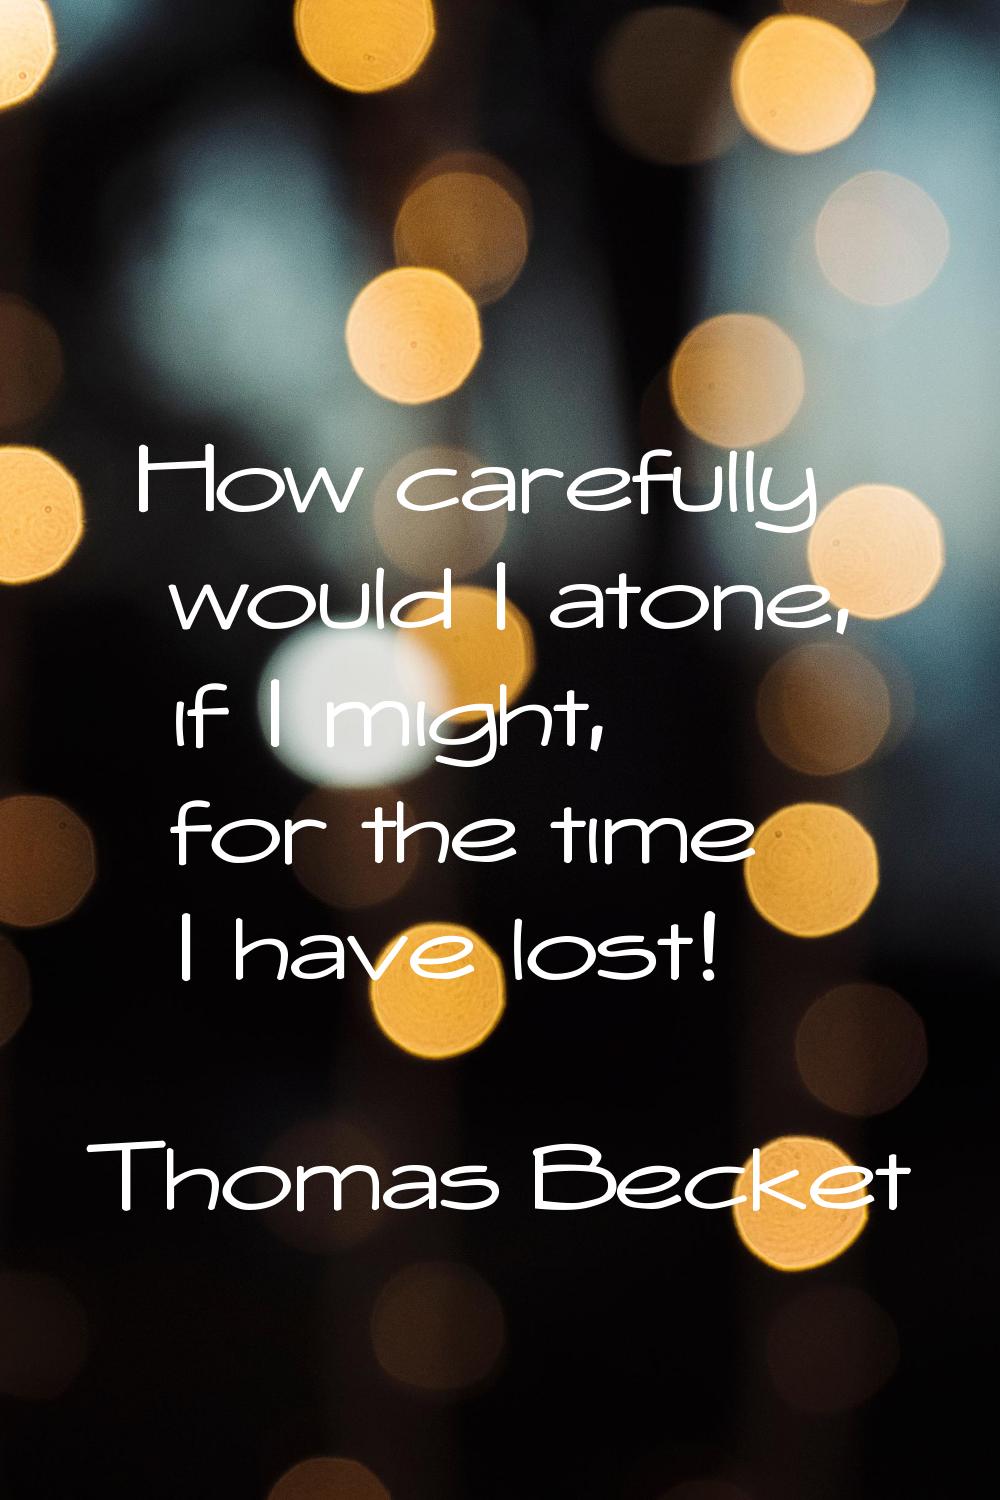 How carefully would I atone, if I might, for the time I have lost!